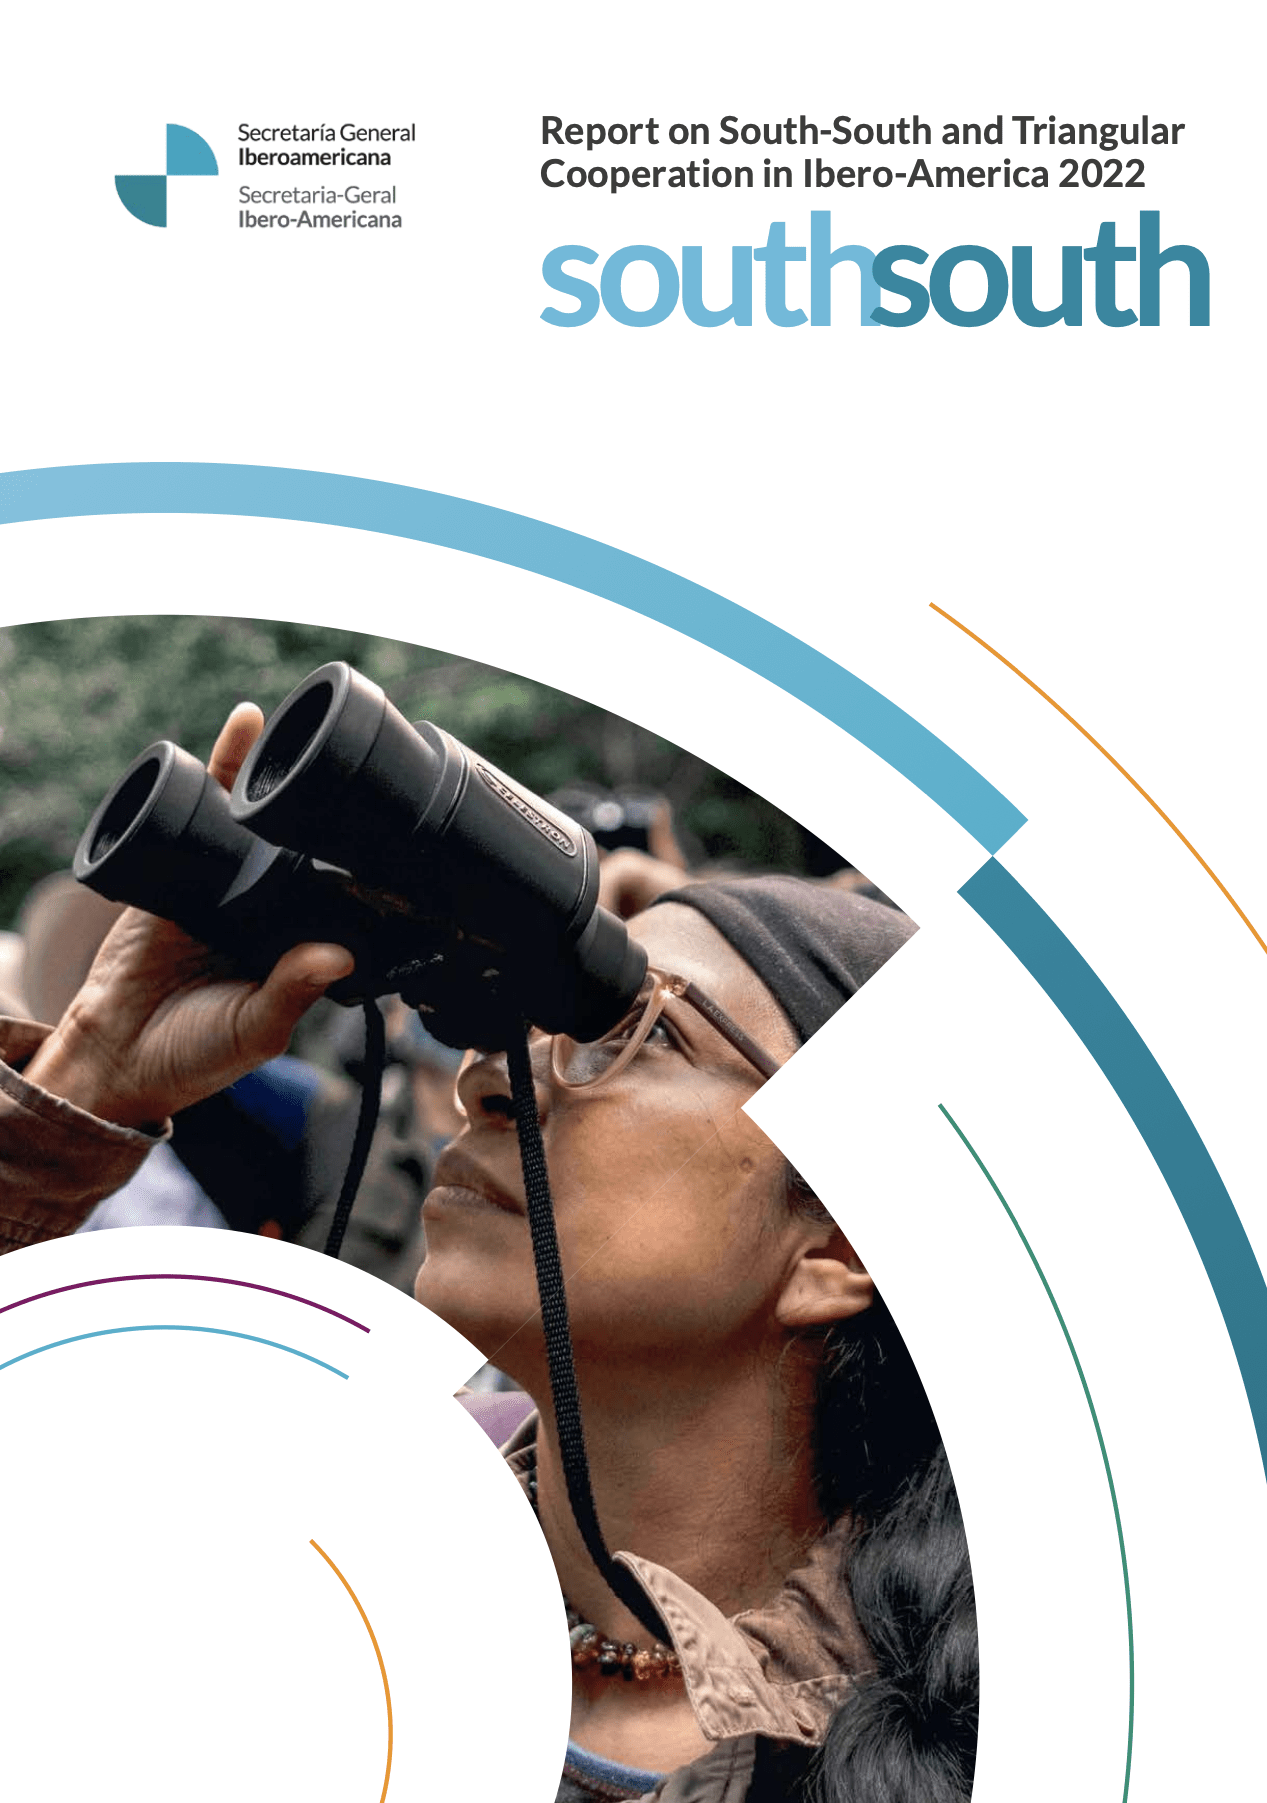 Report on South-South and Triangular Cooperation in Ibero-America 2022